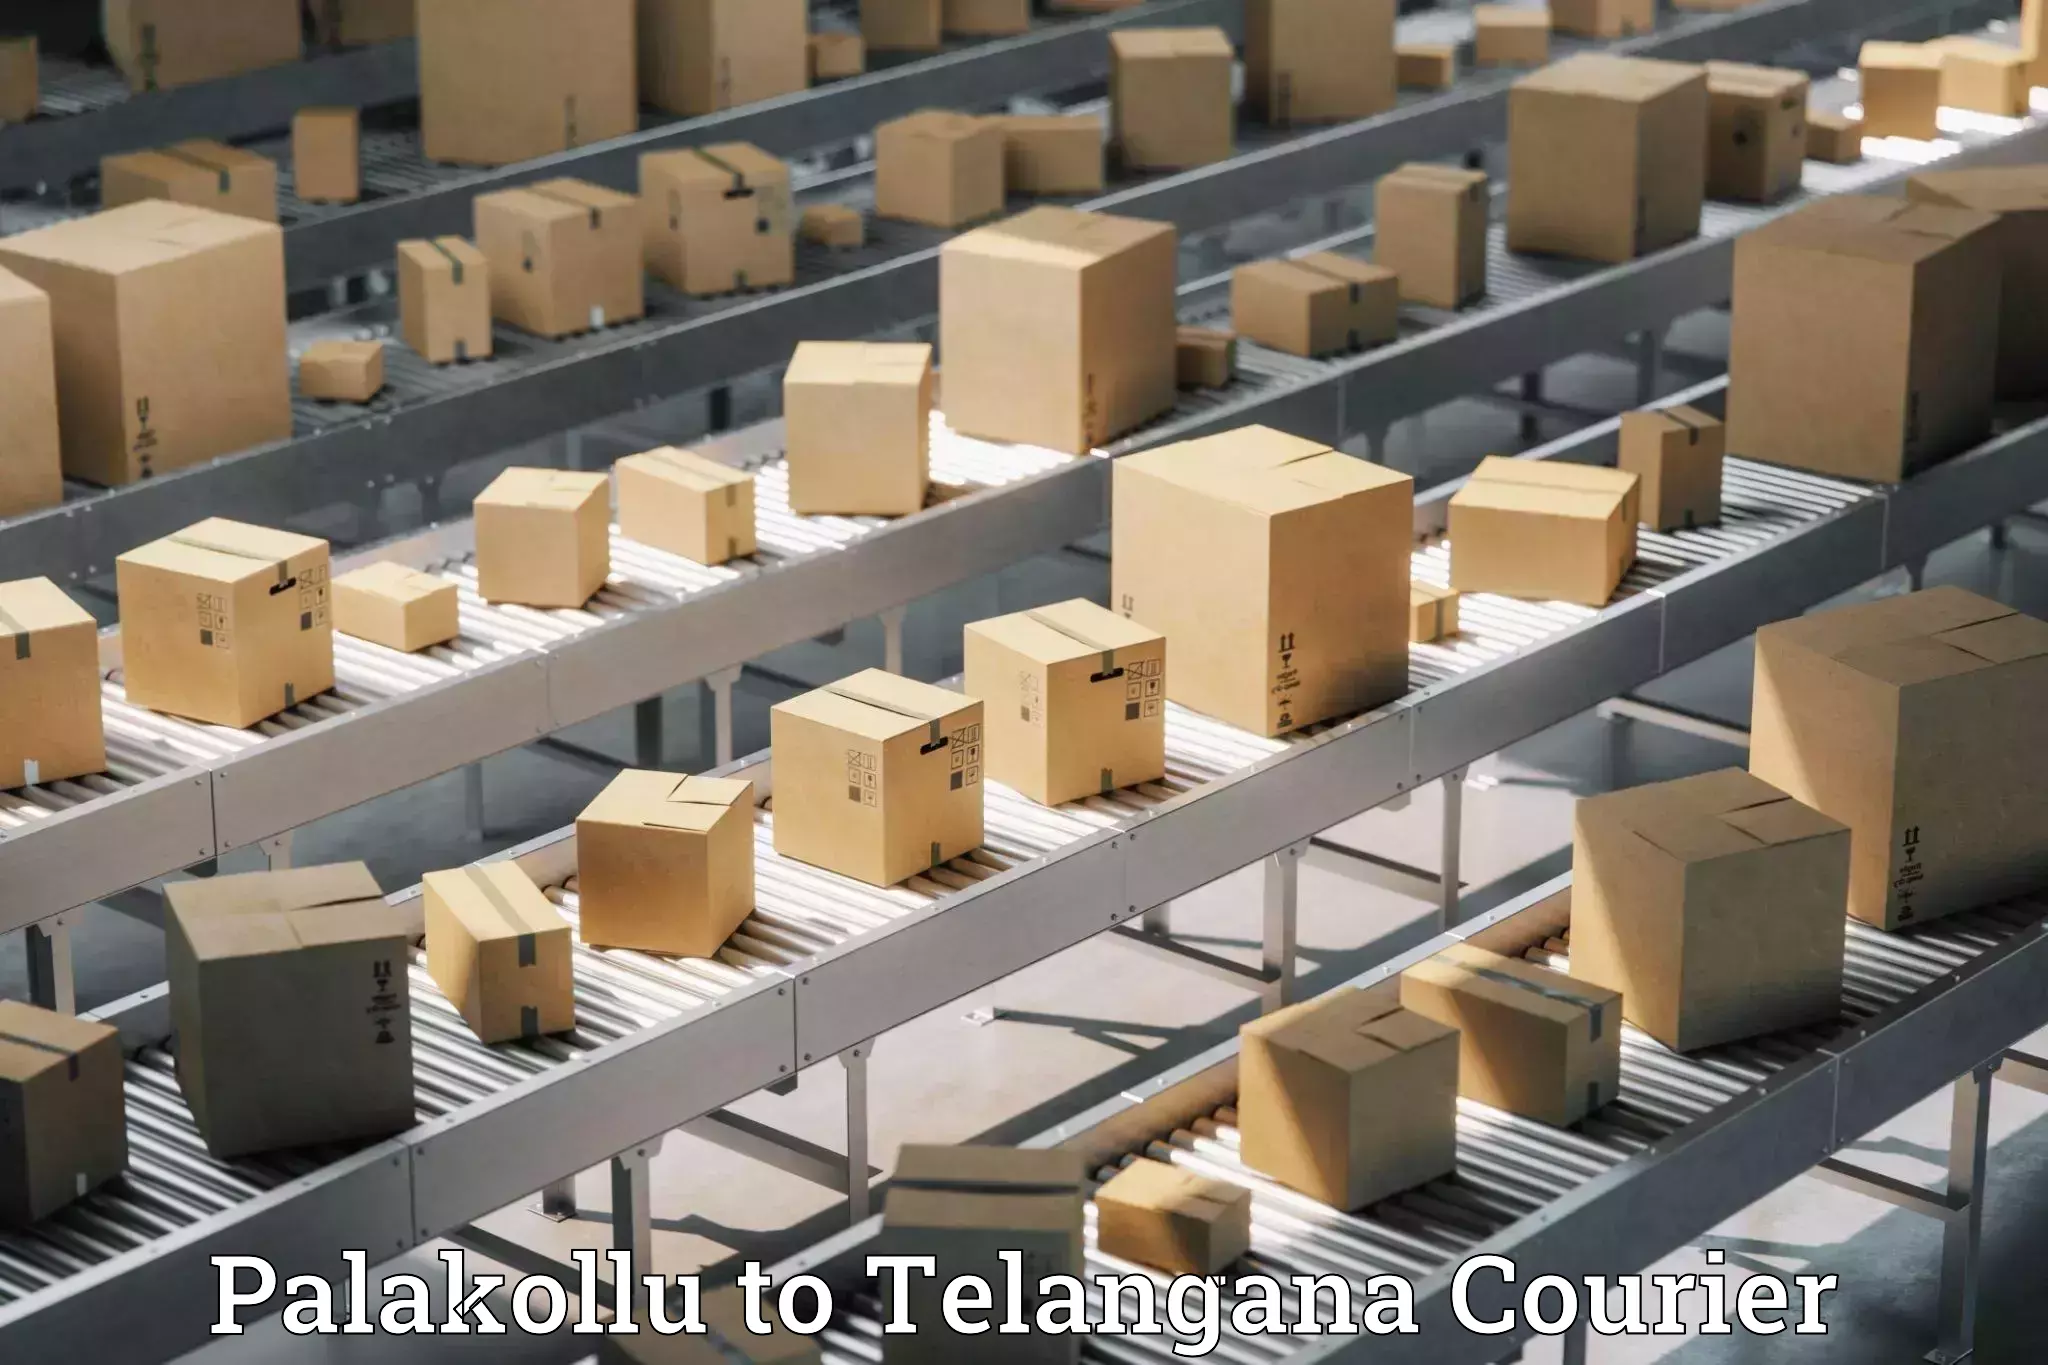 Flexible delivery schedules Palakollu to Kothagudem